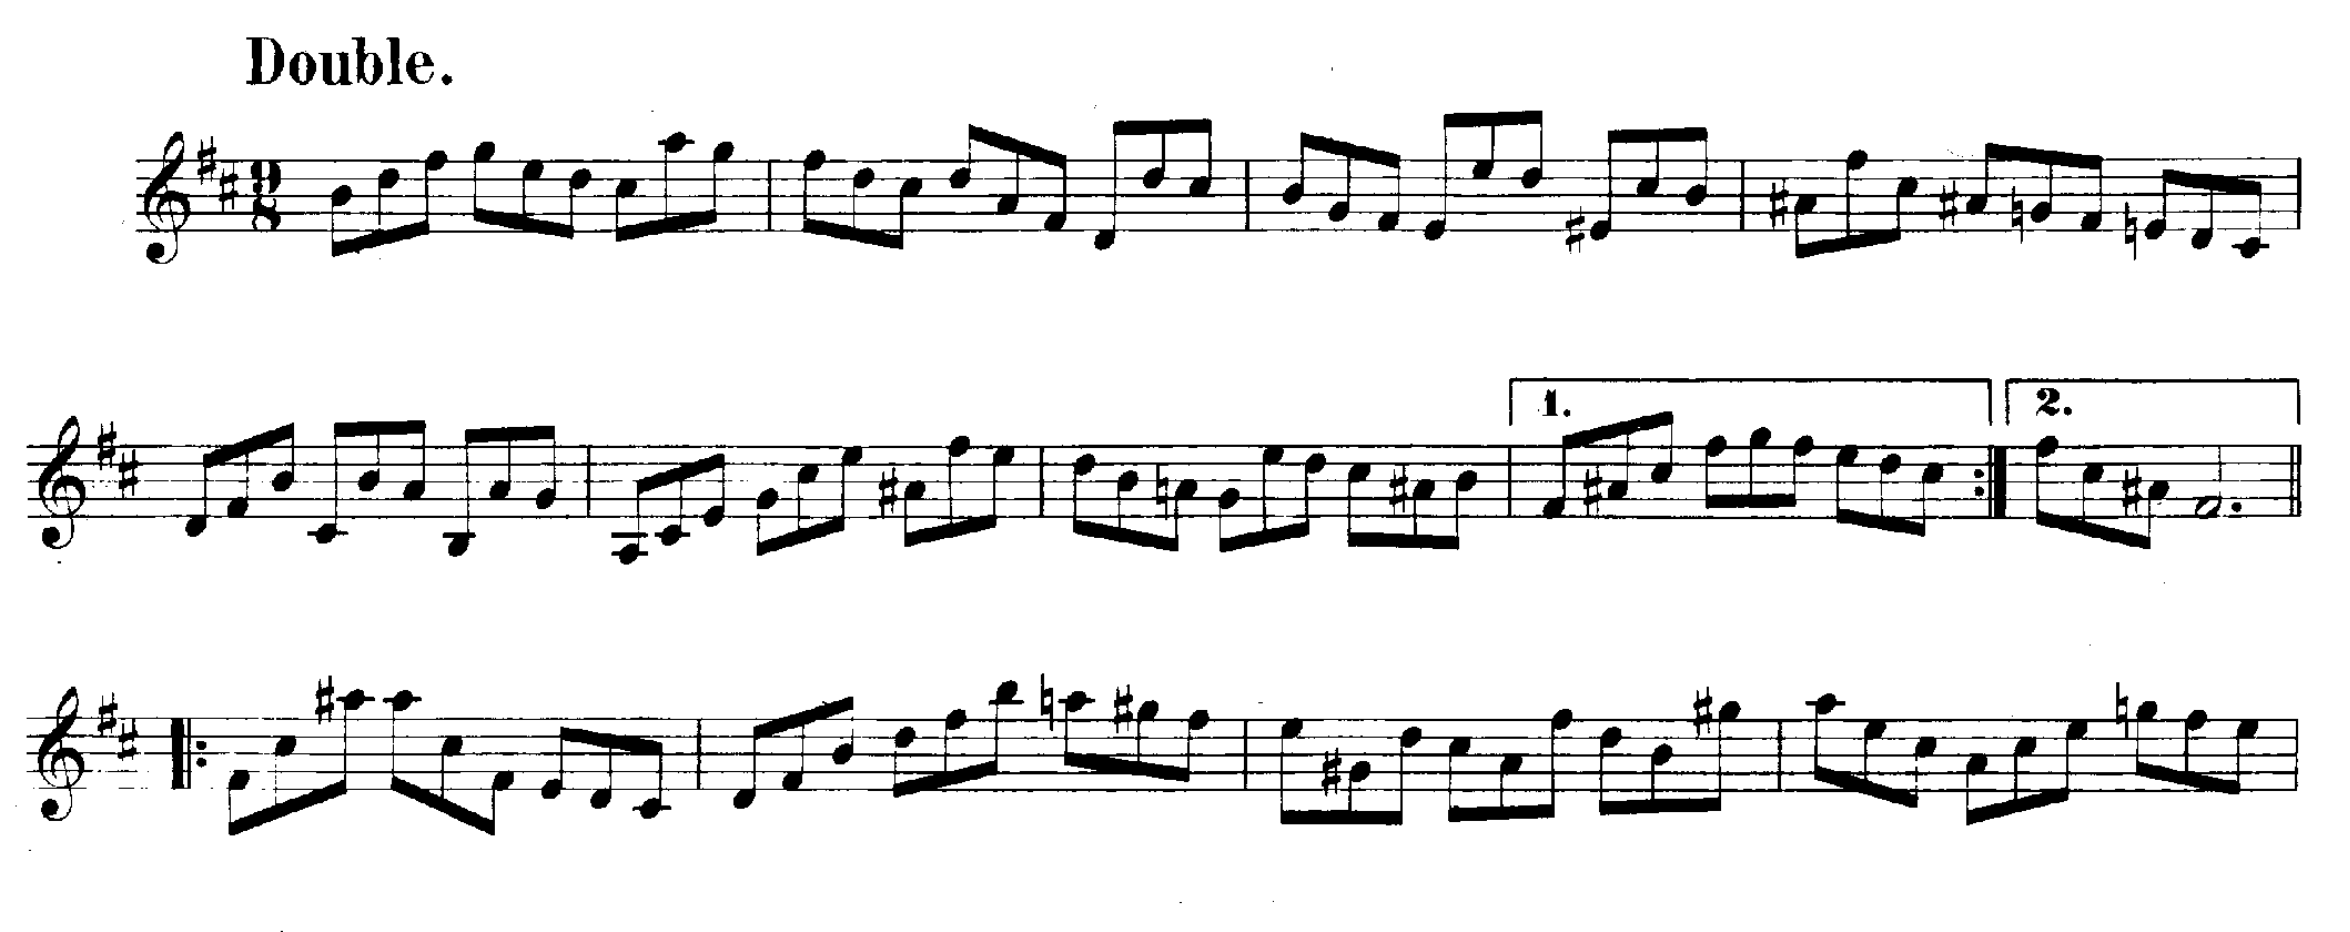 bach double excerpt